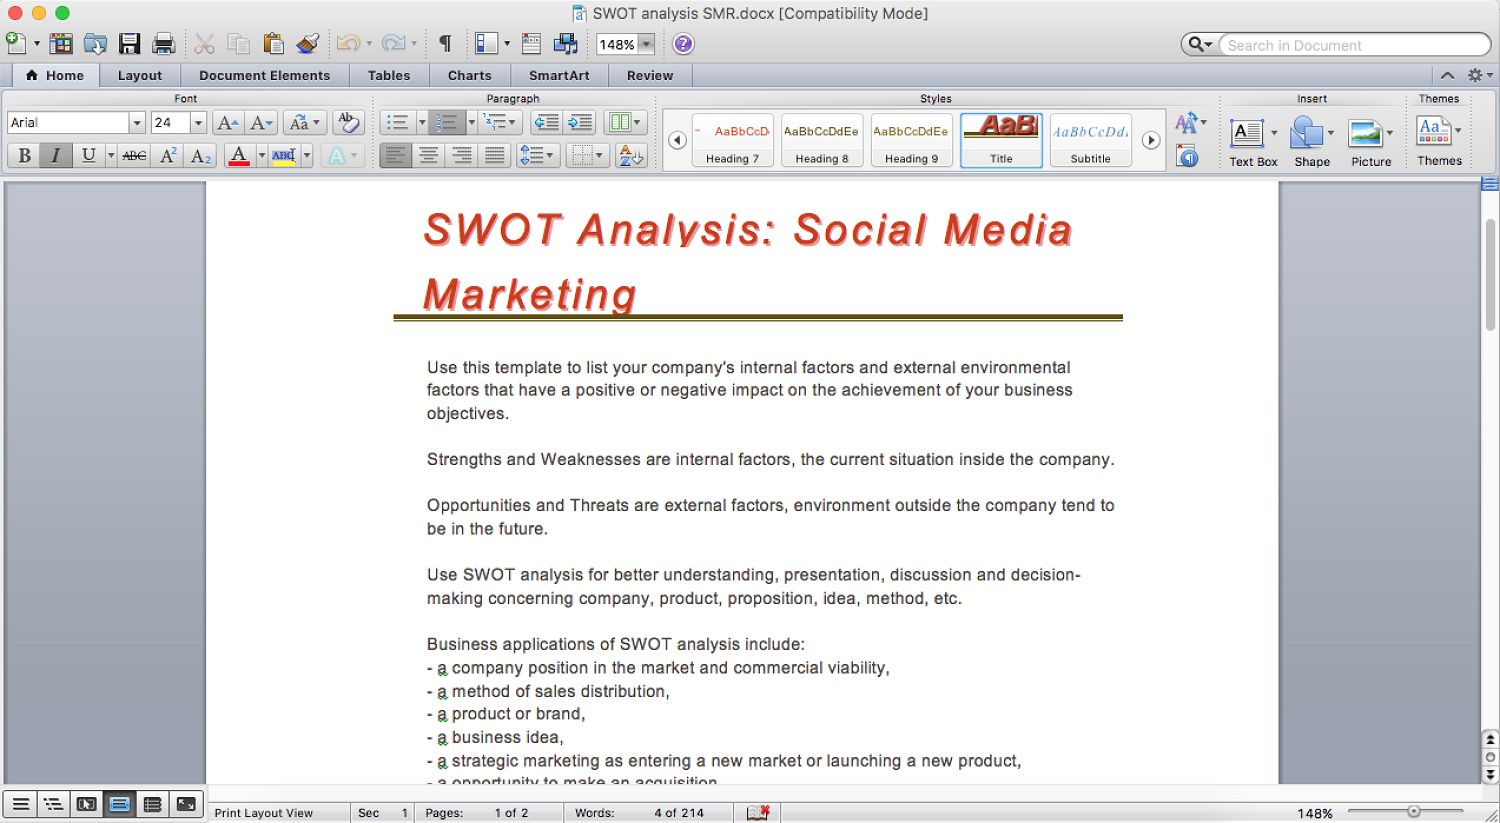 How to Make SWOT Analysis in a Word Document